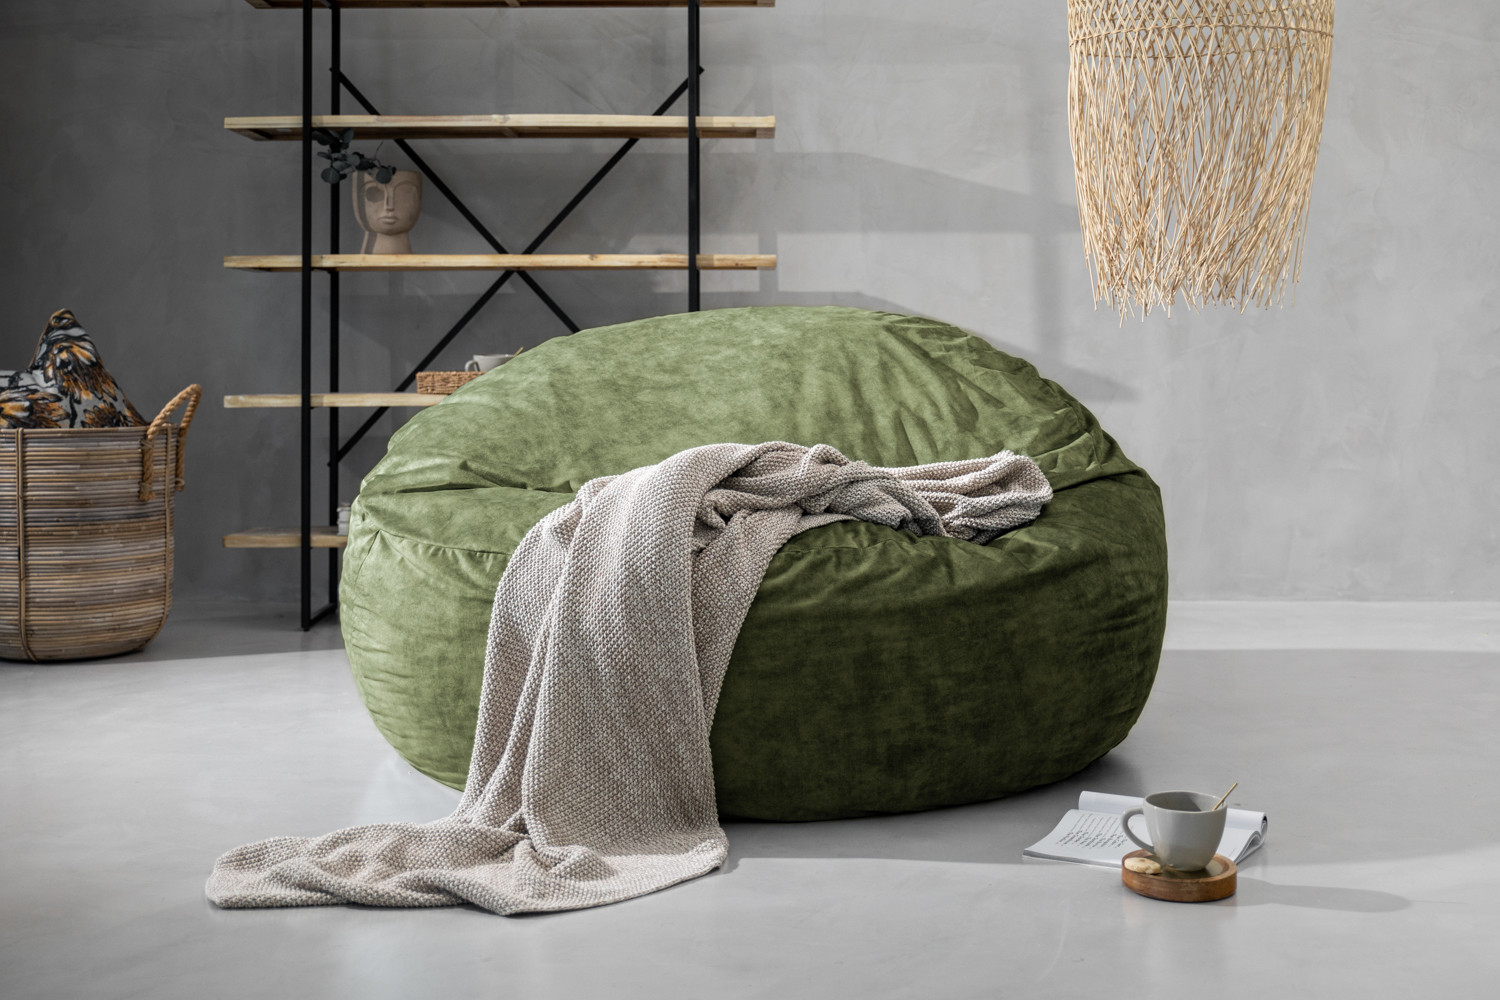 Huge Bean Bag Chair: How to Make Your Living Space Unique – Wilson & Dorset